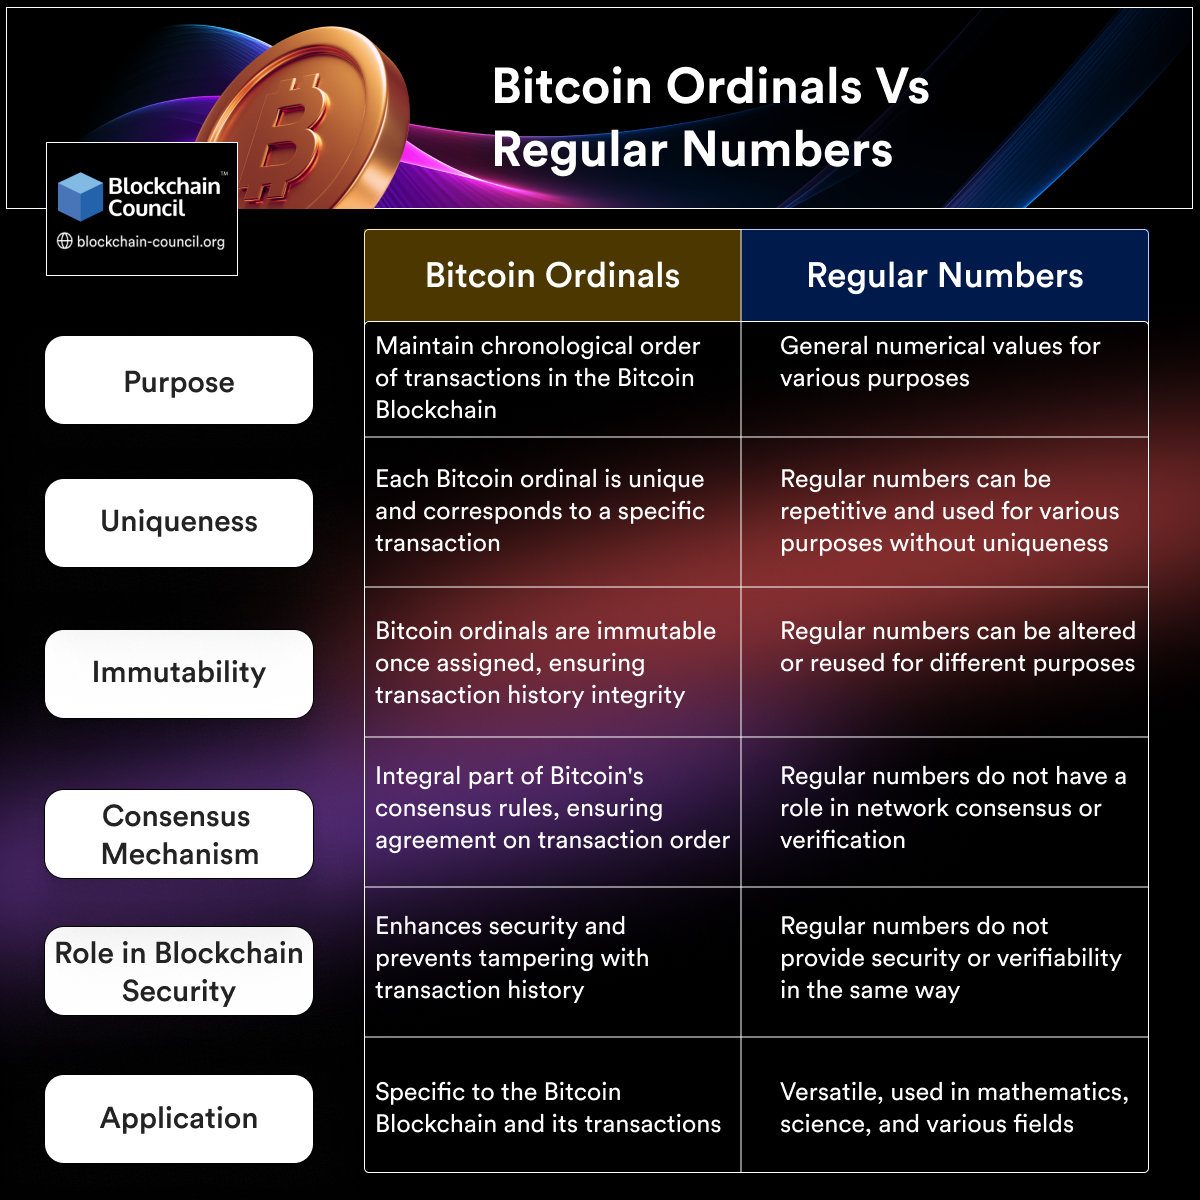 How Bitcoin ordinals differ from regular numbers